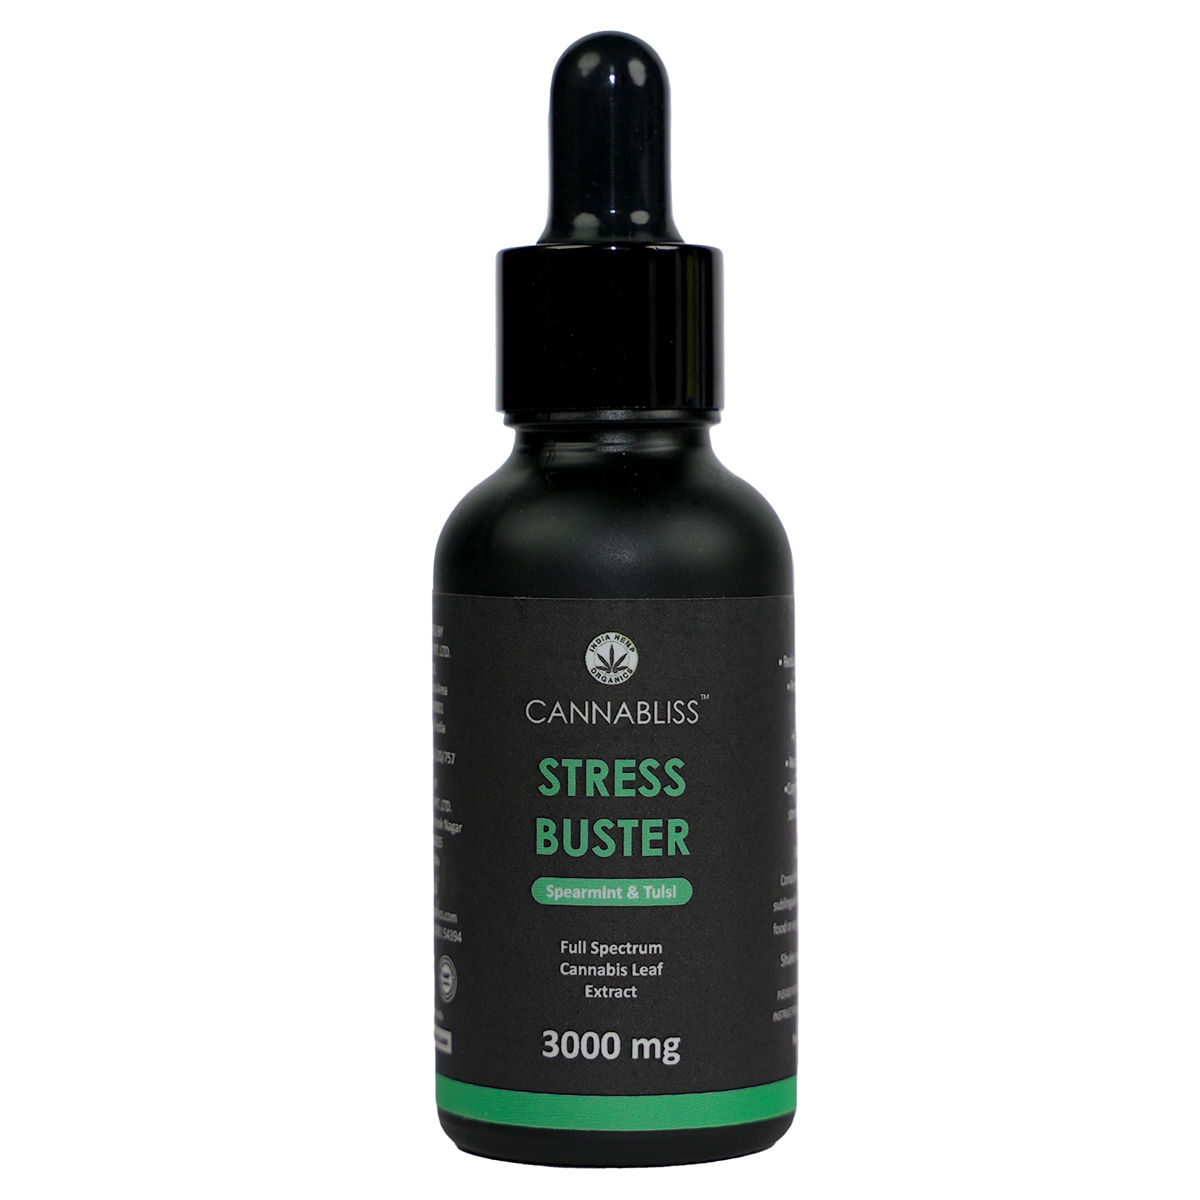 Buy Cannabliss Stress Buster 3000 mg Oil, 30 ml Online